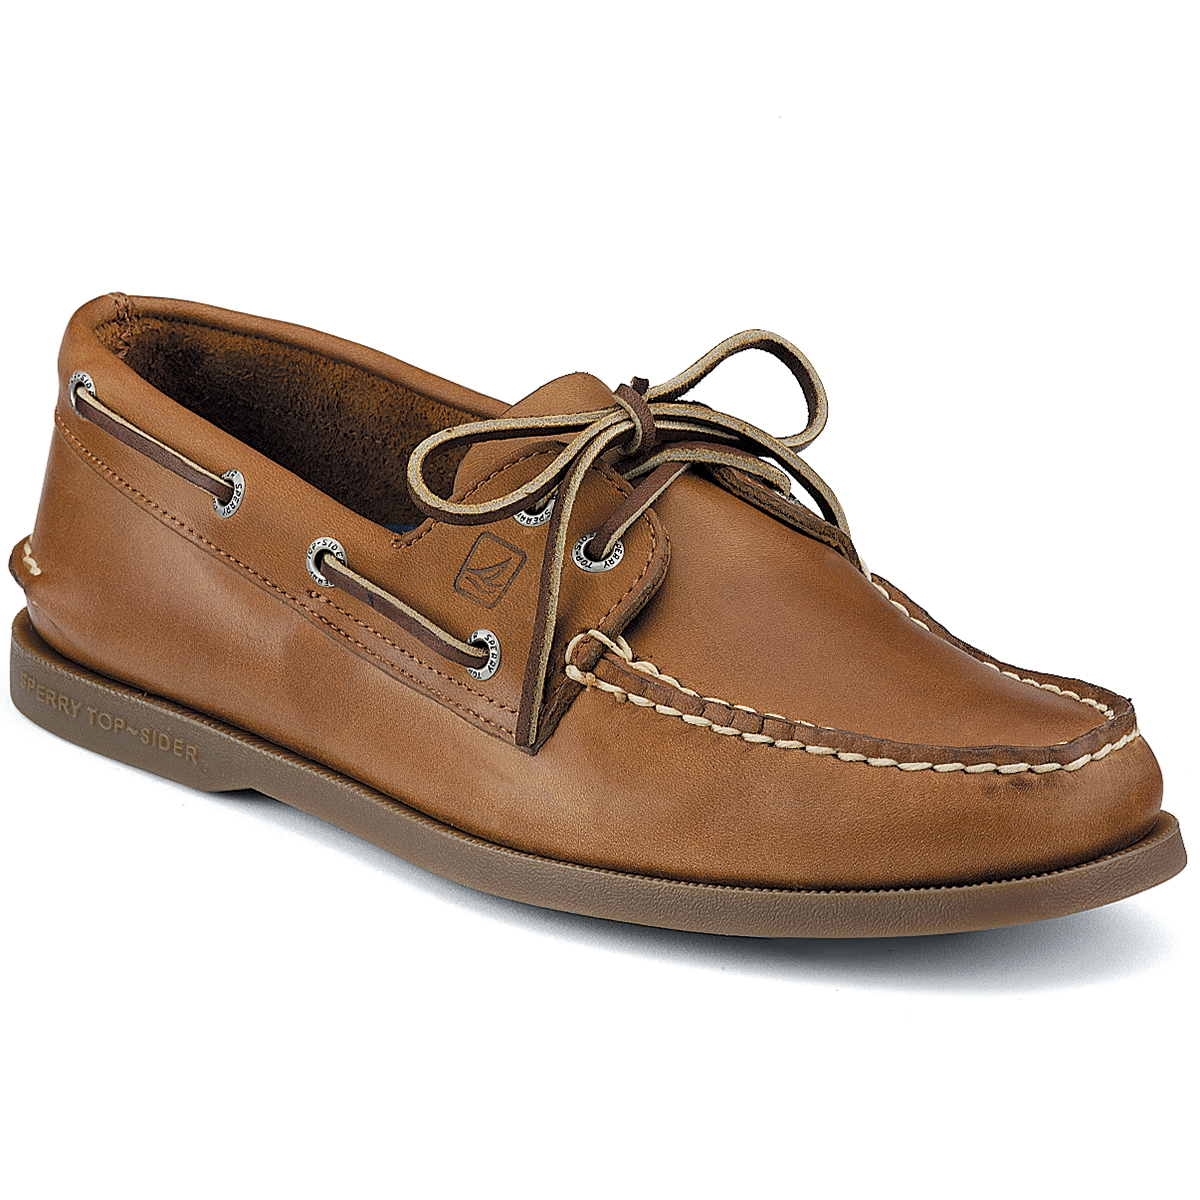 Sperry Men's Authentic Original 2-Eye Boat Shoes - Size 15